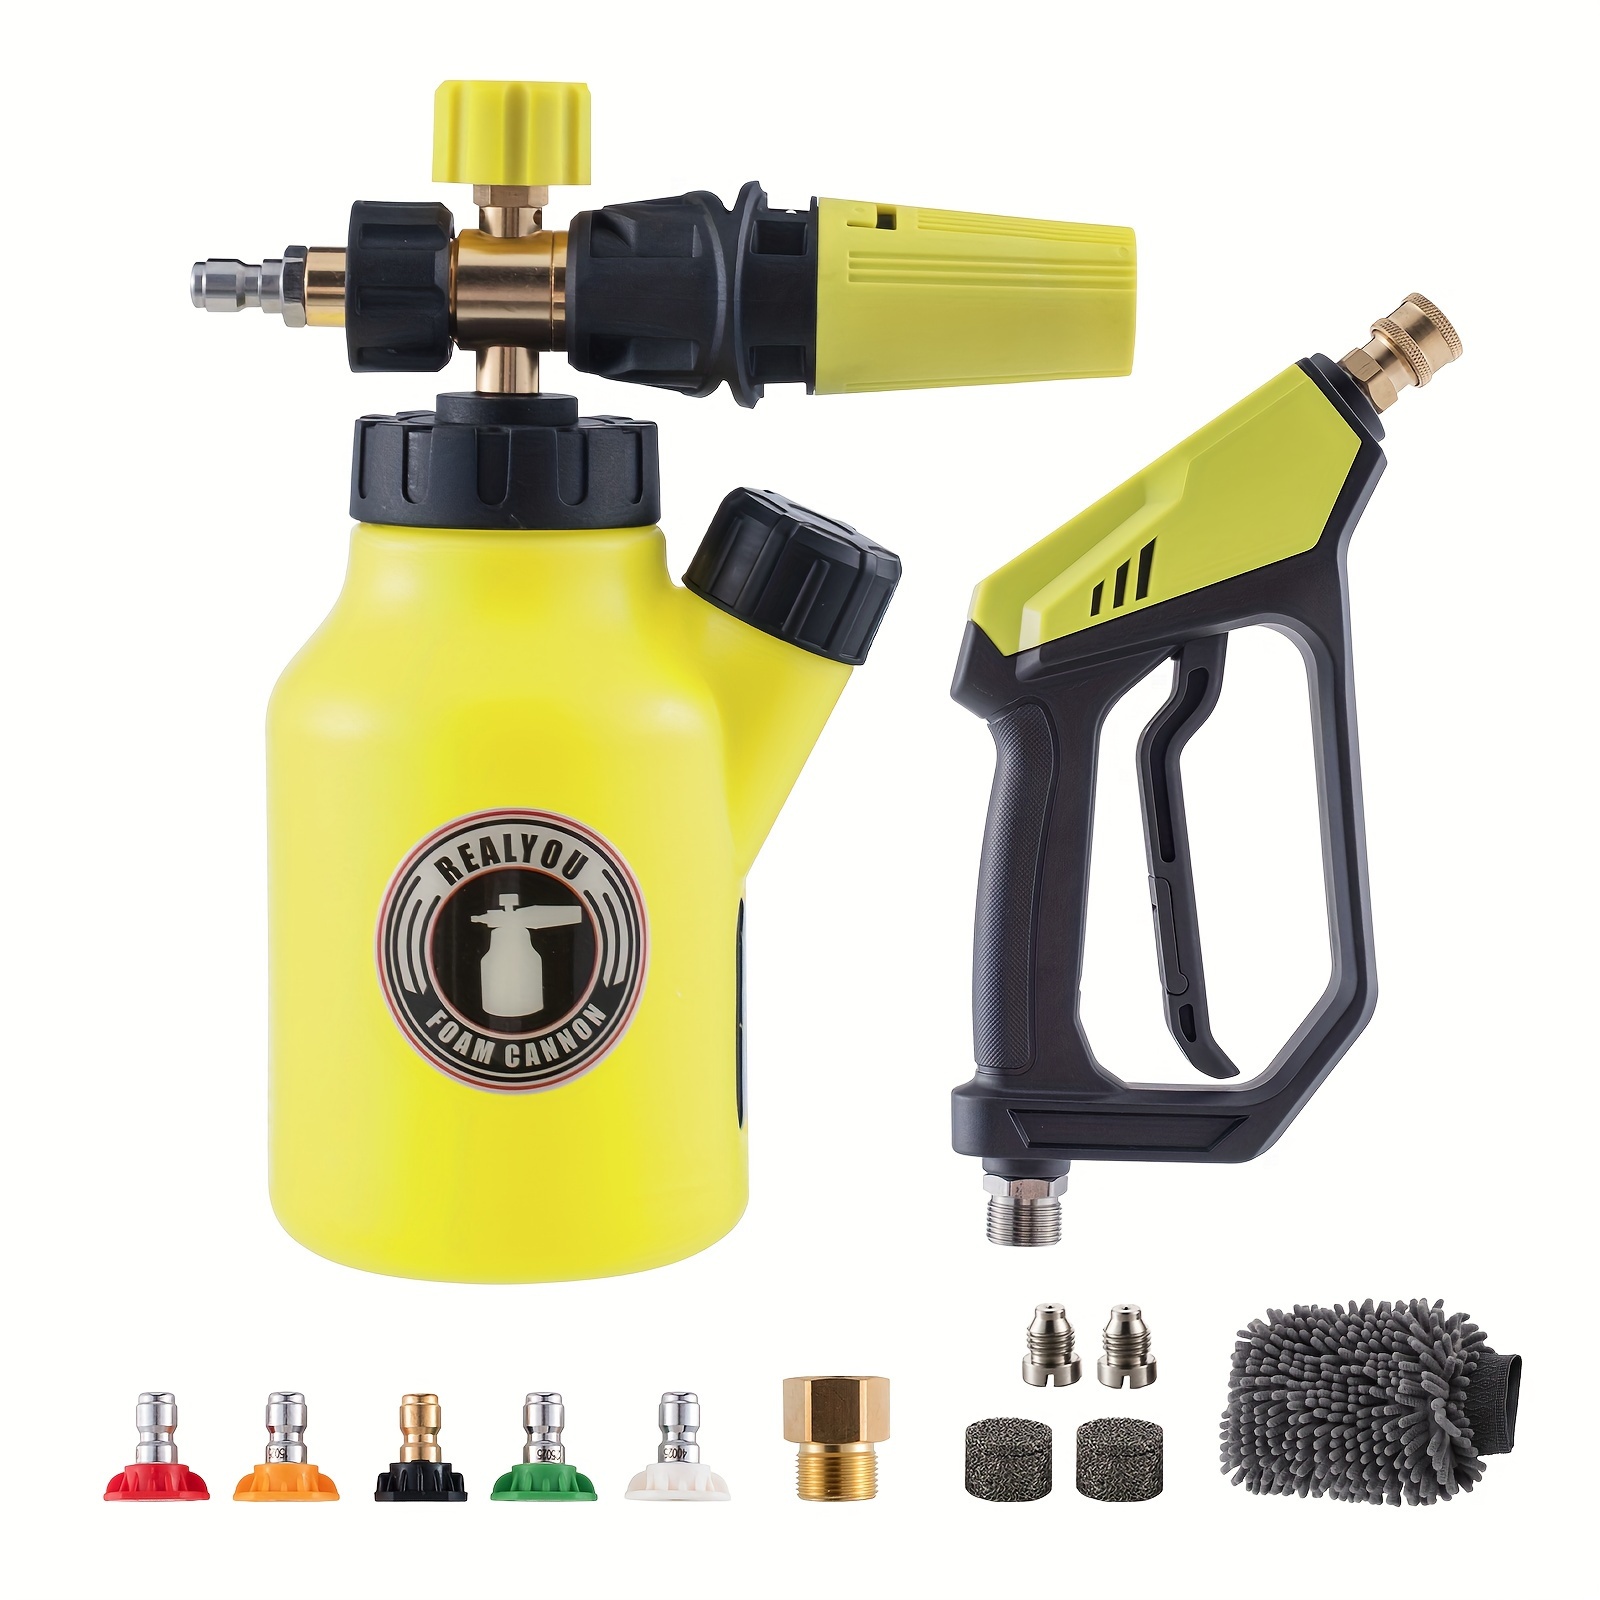 

Pressure Washer Gun With Foam Cannon, Car Wash Kit, Pressure Washer Car Wash Foam Gun With 1/4 Inch Quick Connector, 5 Pressure Washer Nozzle Tips